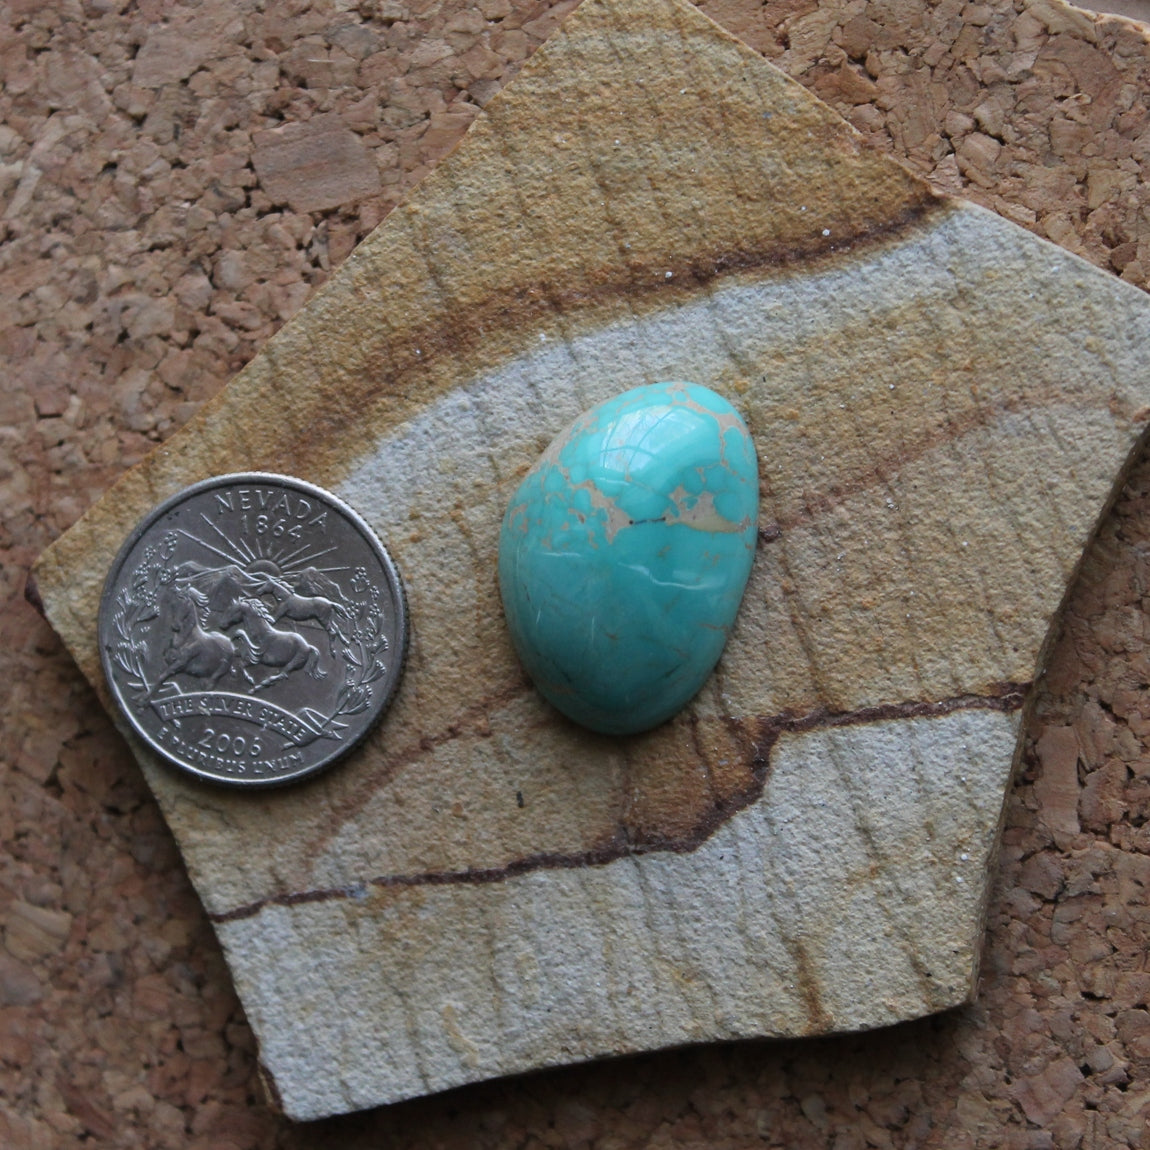 32 carat blue Stone Mountain Turquoise cabochon with a high dome